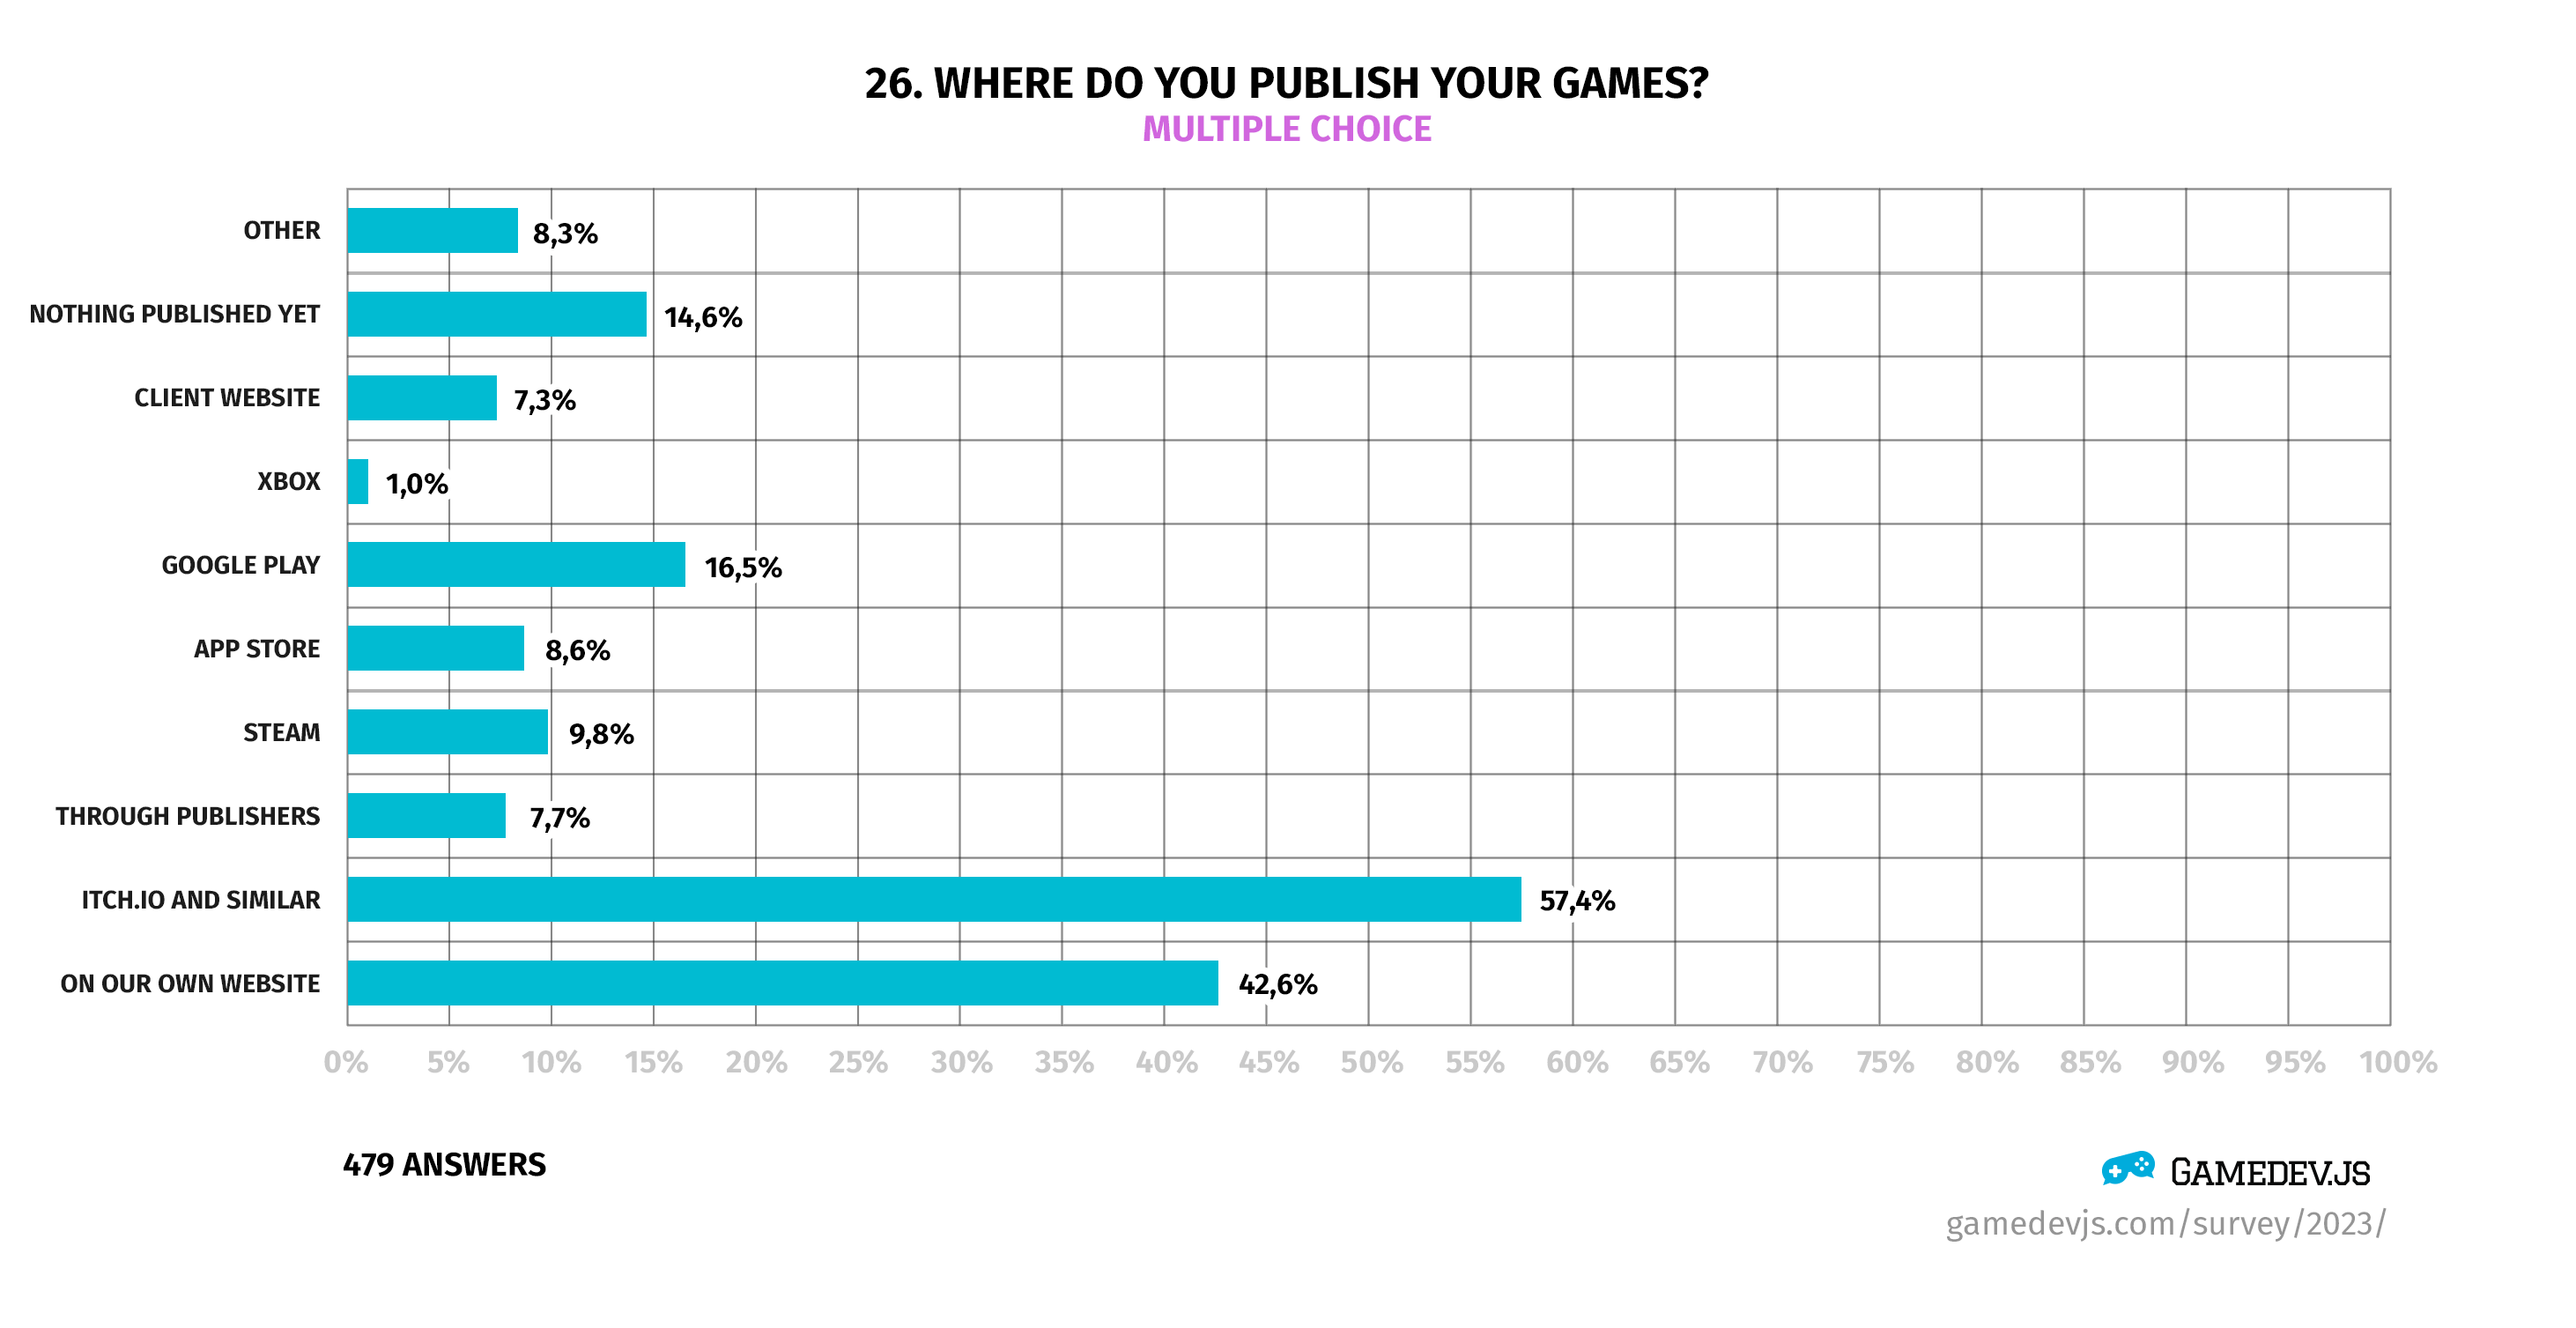 Gamedev.js Survey 2023 - Question #26: Where do you publish your games?